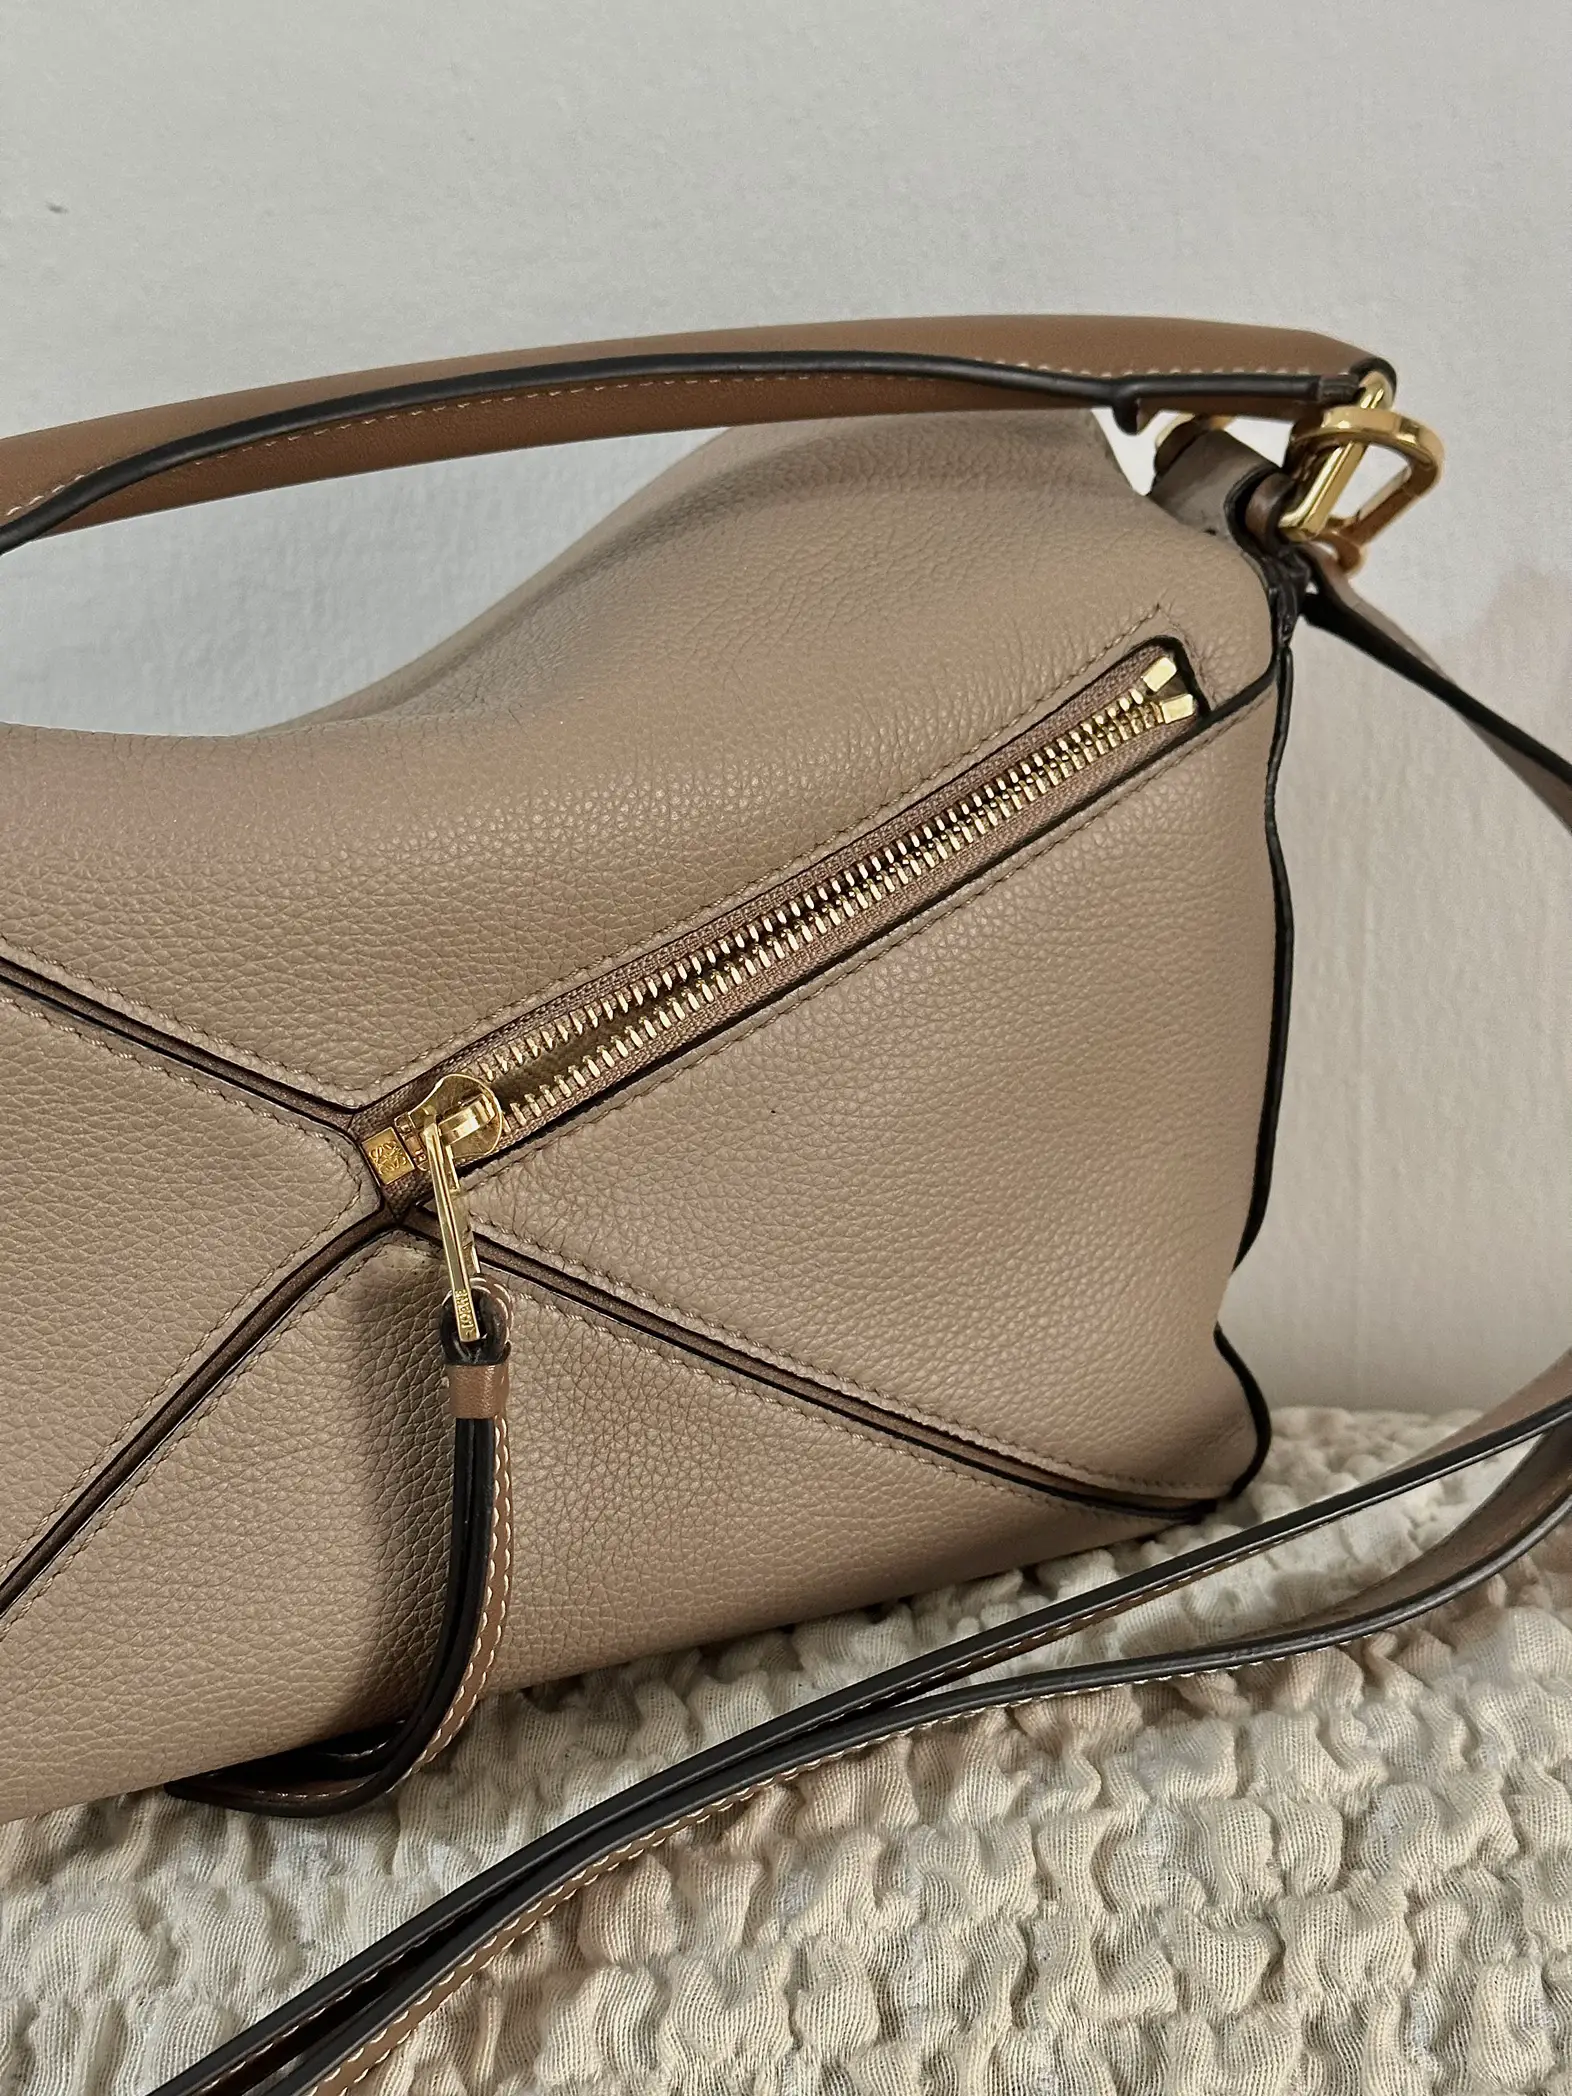 LOEWE SMALL PUZZLE BAG HONEST REVIEW